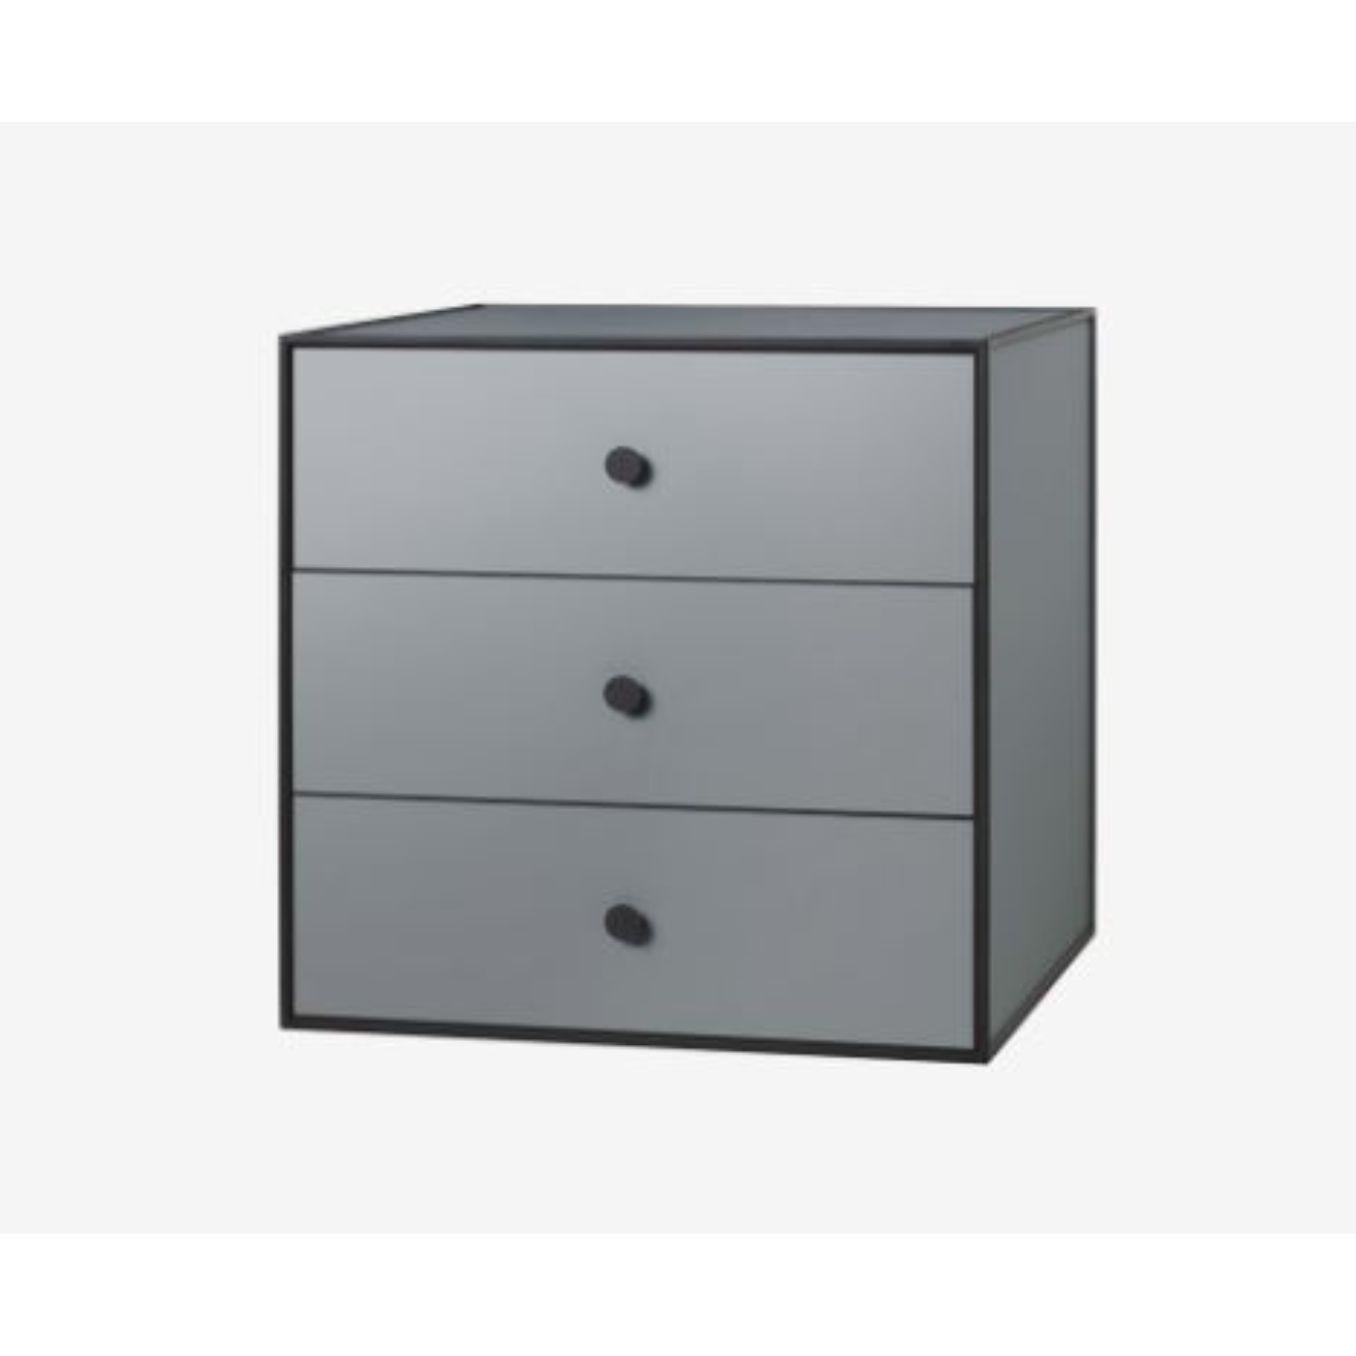 49 Dark grey frame box with 3 drawers by Lassen
Dimensions: D 49 x W 42 x H 49 cm 
Materials: finér, melamin, melamin, melamine, metal, veneer
Also available in different colors and dimensions. 
Weight: 24 Kg.


By Lassen is a Danish design